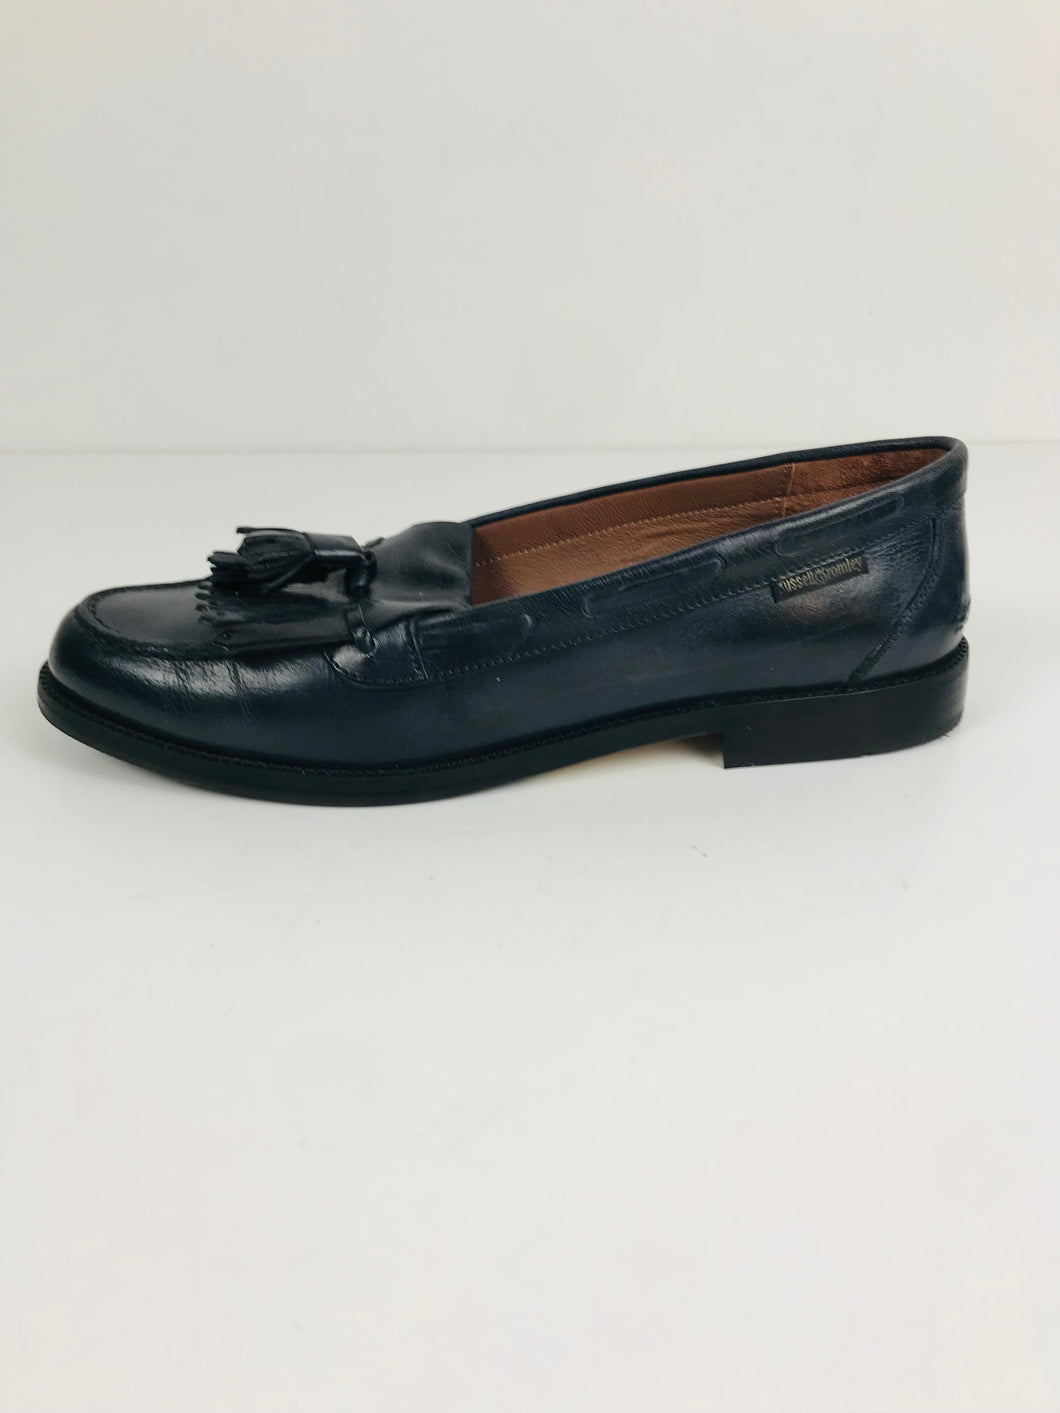 Russell & Bromley Women's Leather Loafer Flats Shoes | EU39.5 UK6.5 | Blue